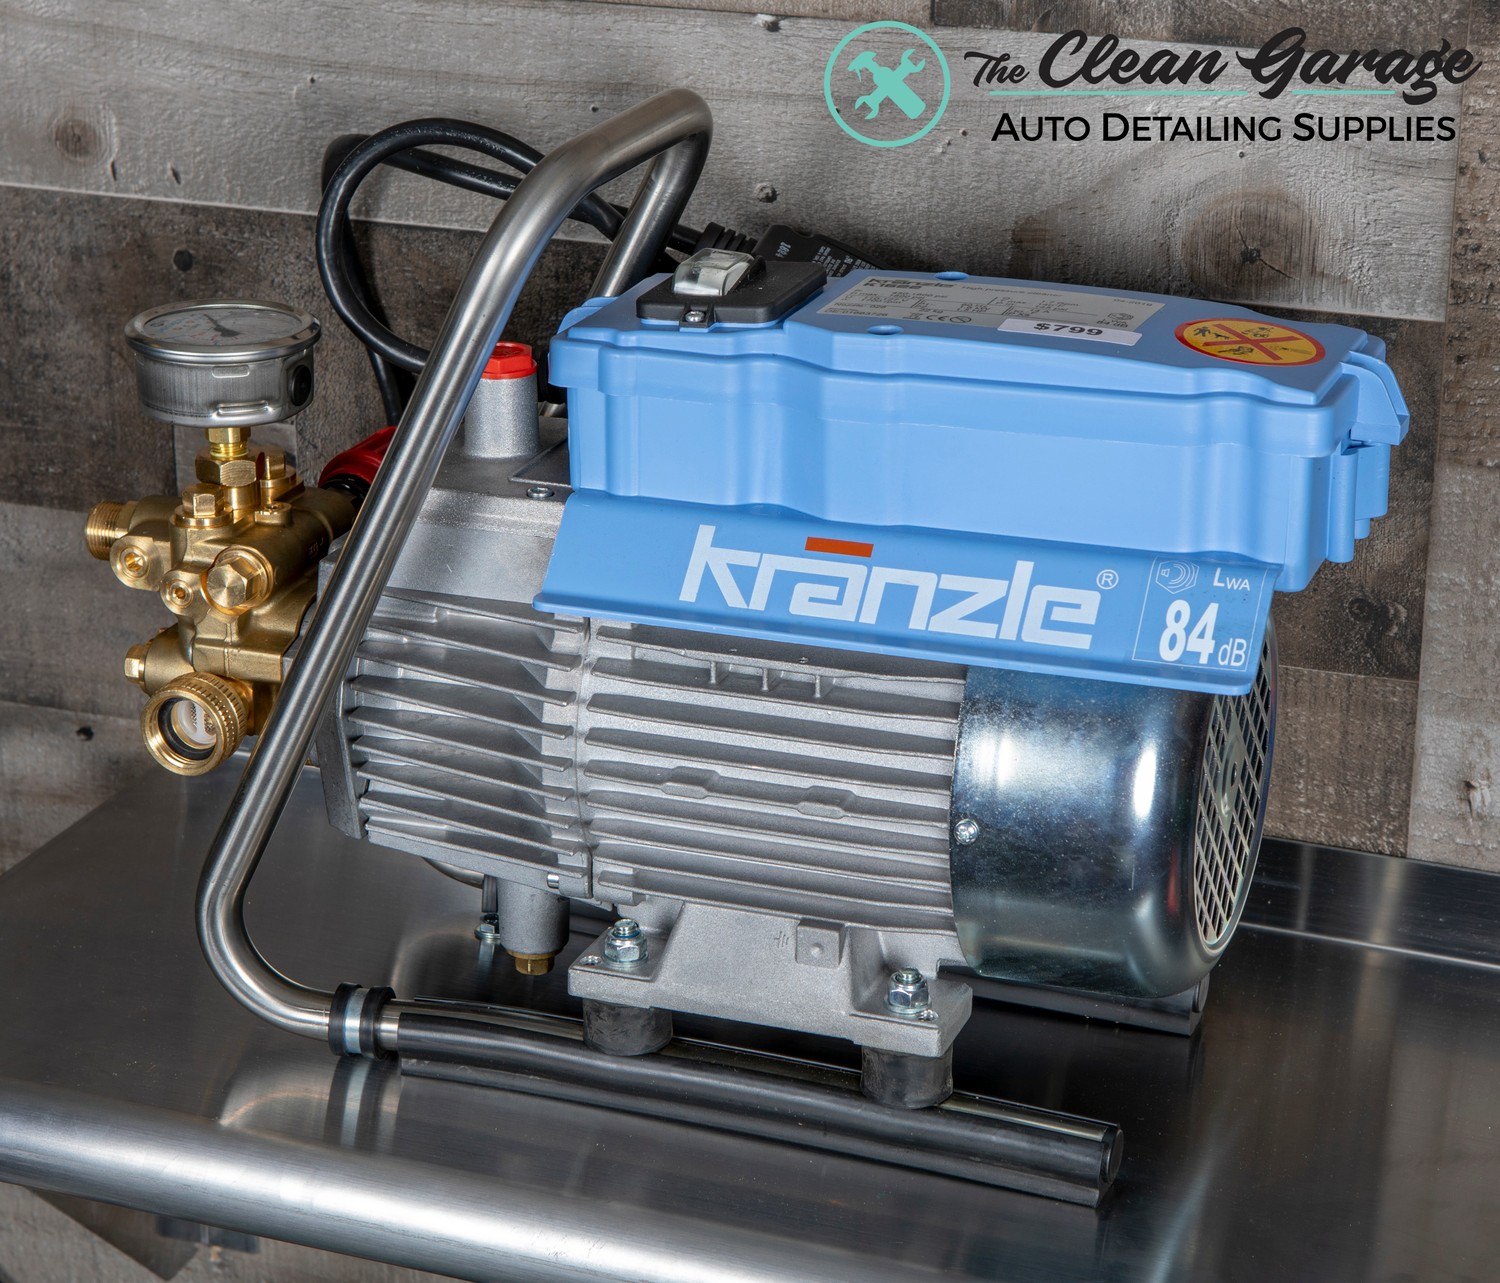 Kranzle K1622TS Pressure Washer | Complete Wall or Cart Mount Package | Level 5